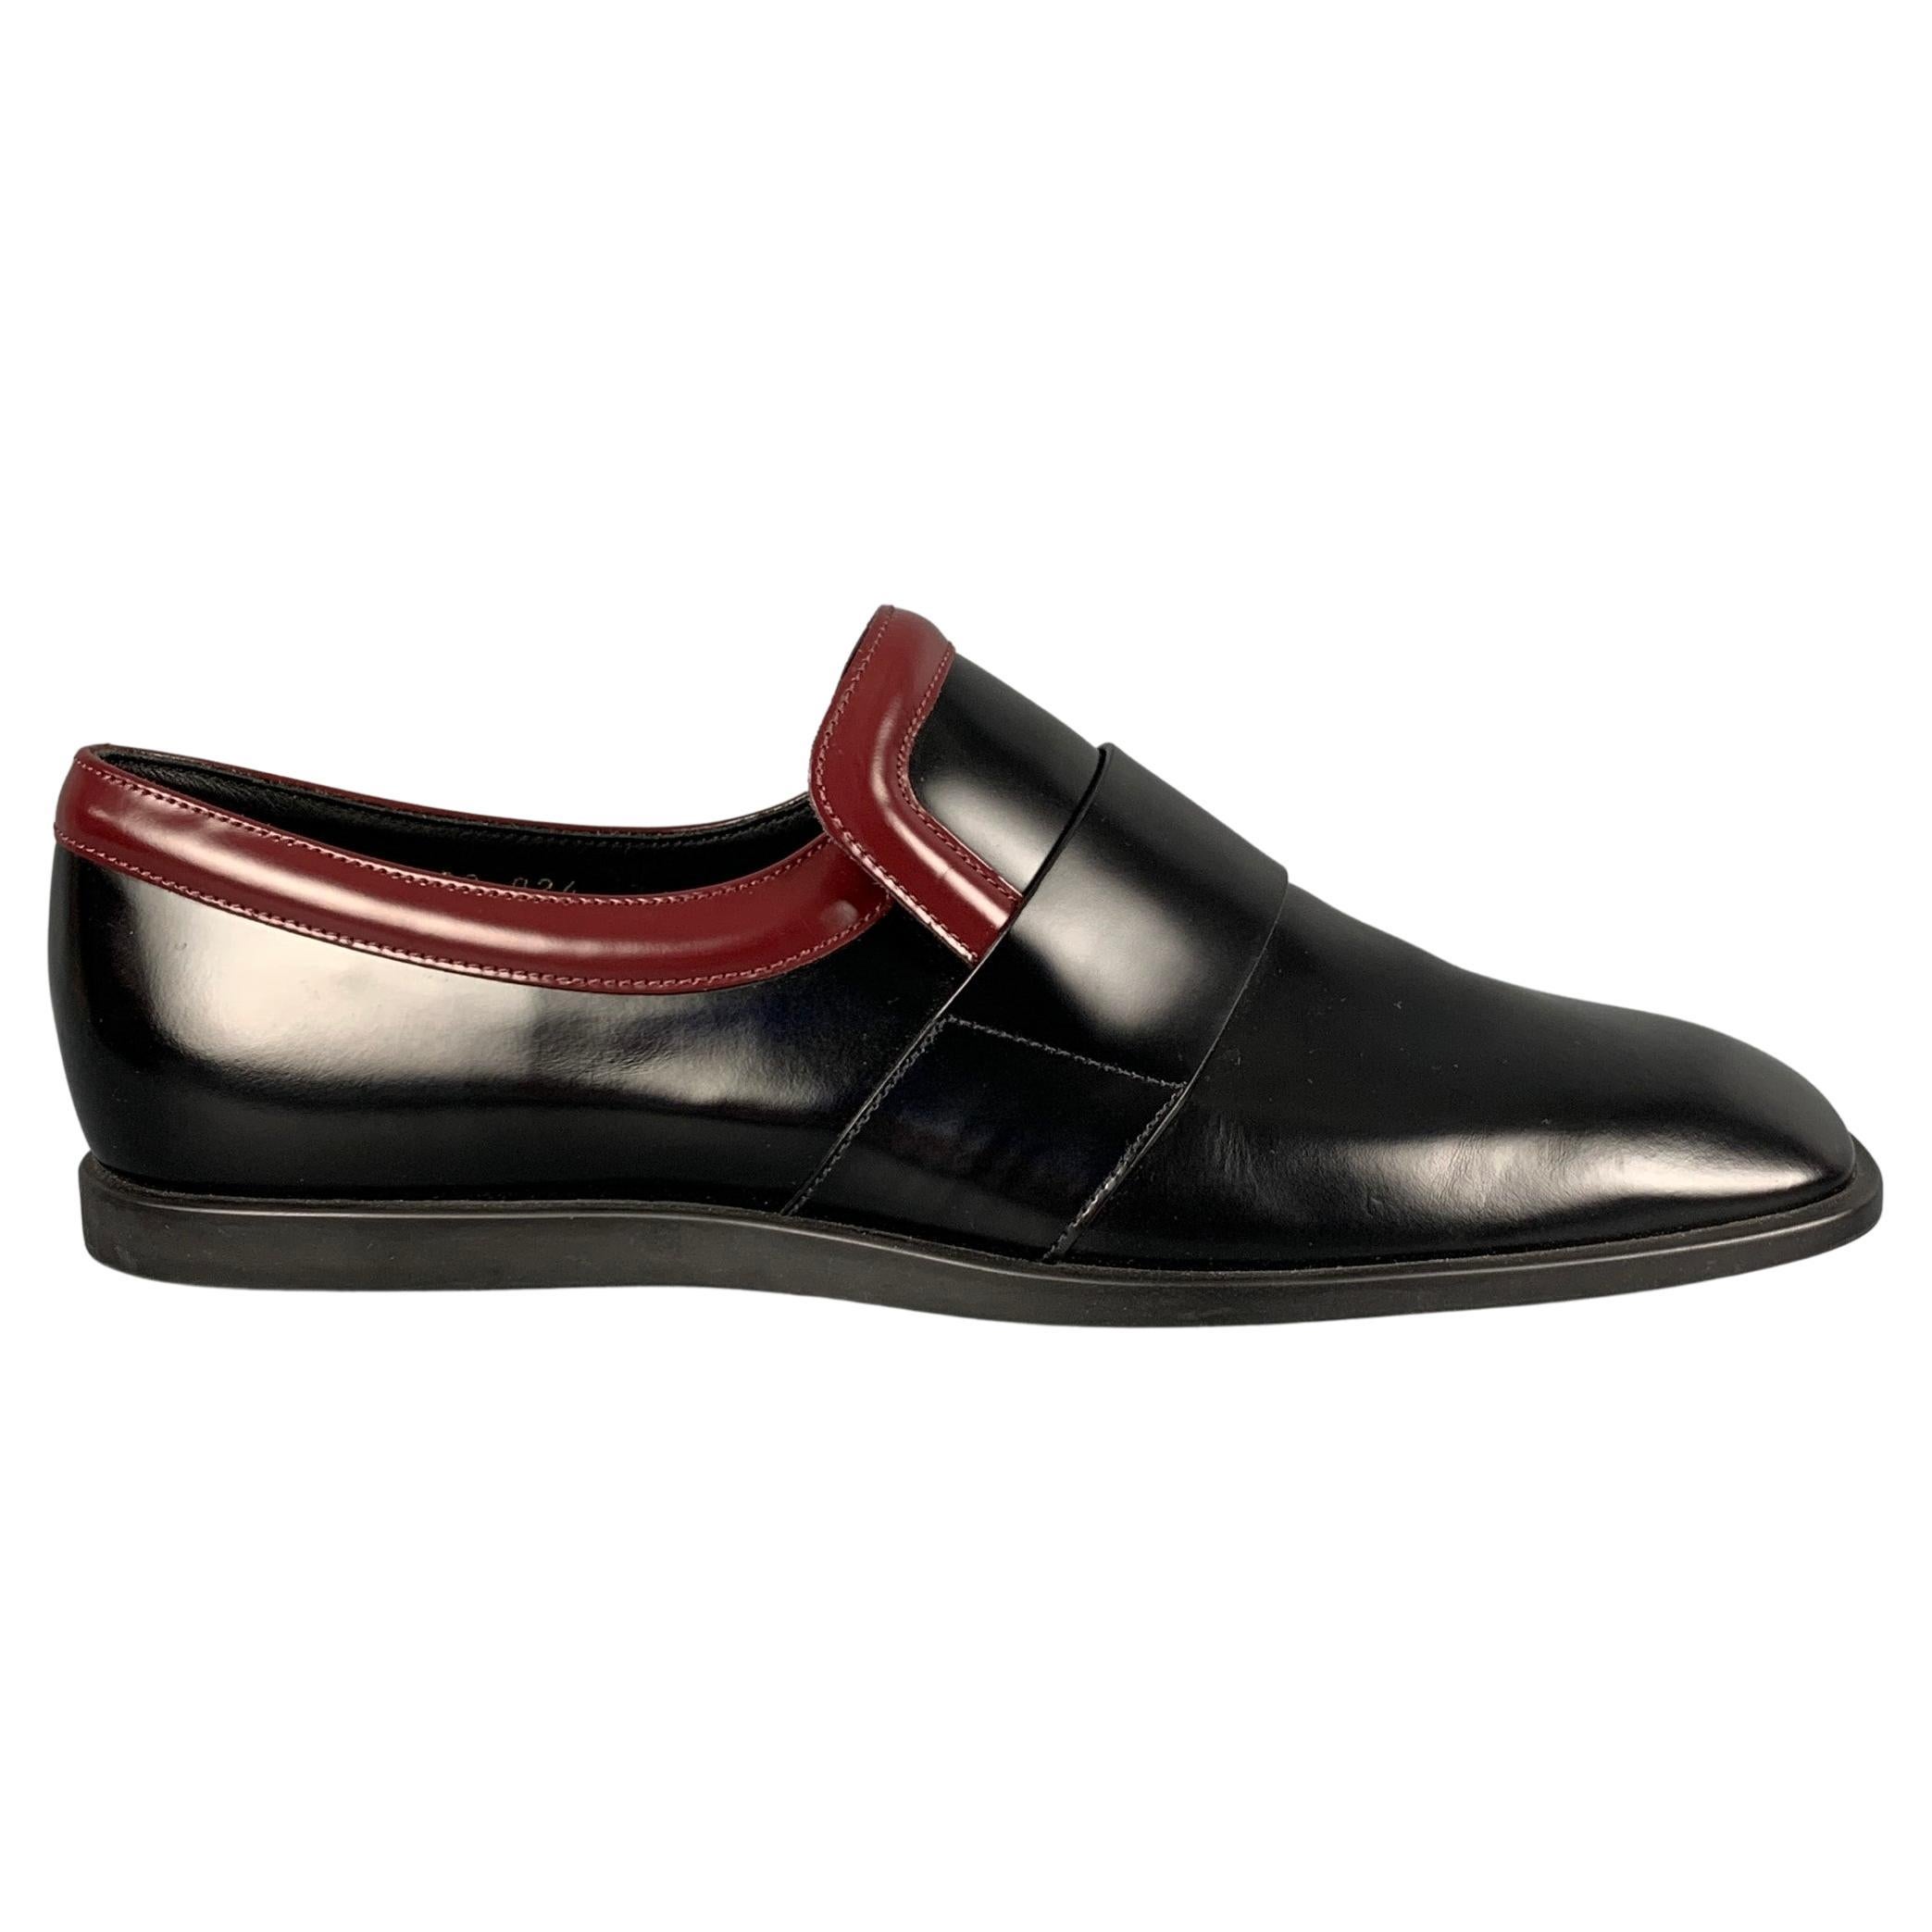 PRADA Size 7.5 Black Burgundy Two Toned Leather Square Toe Loafers